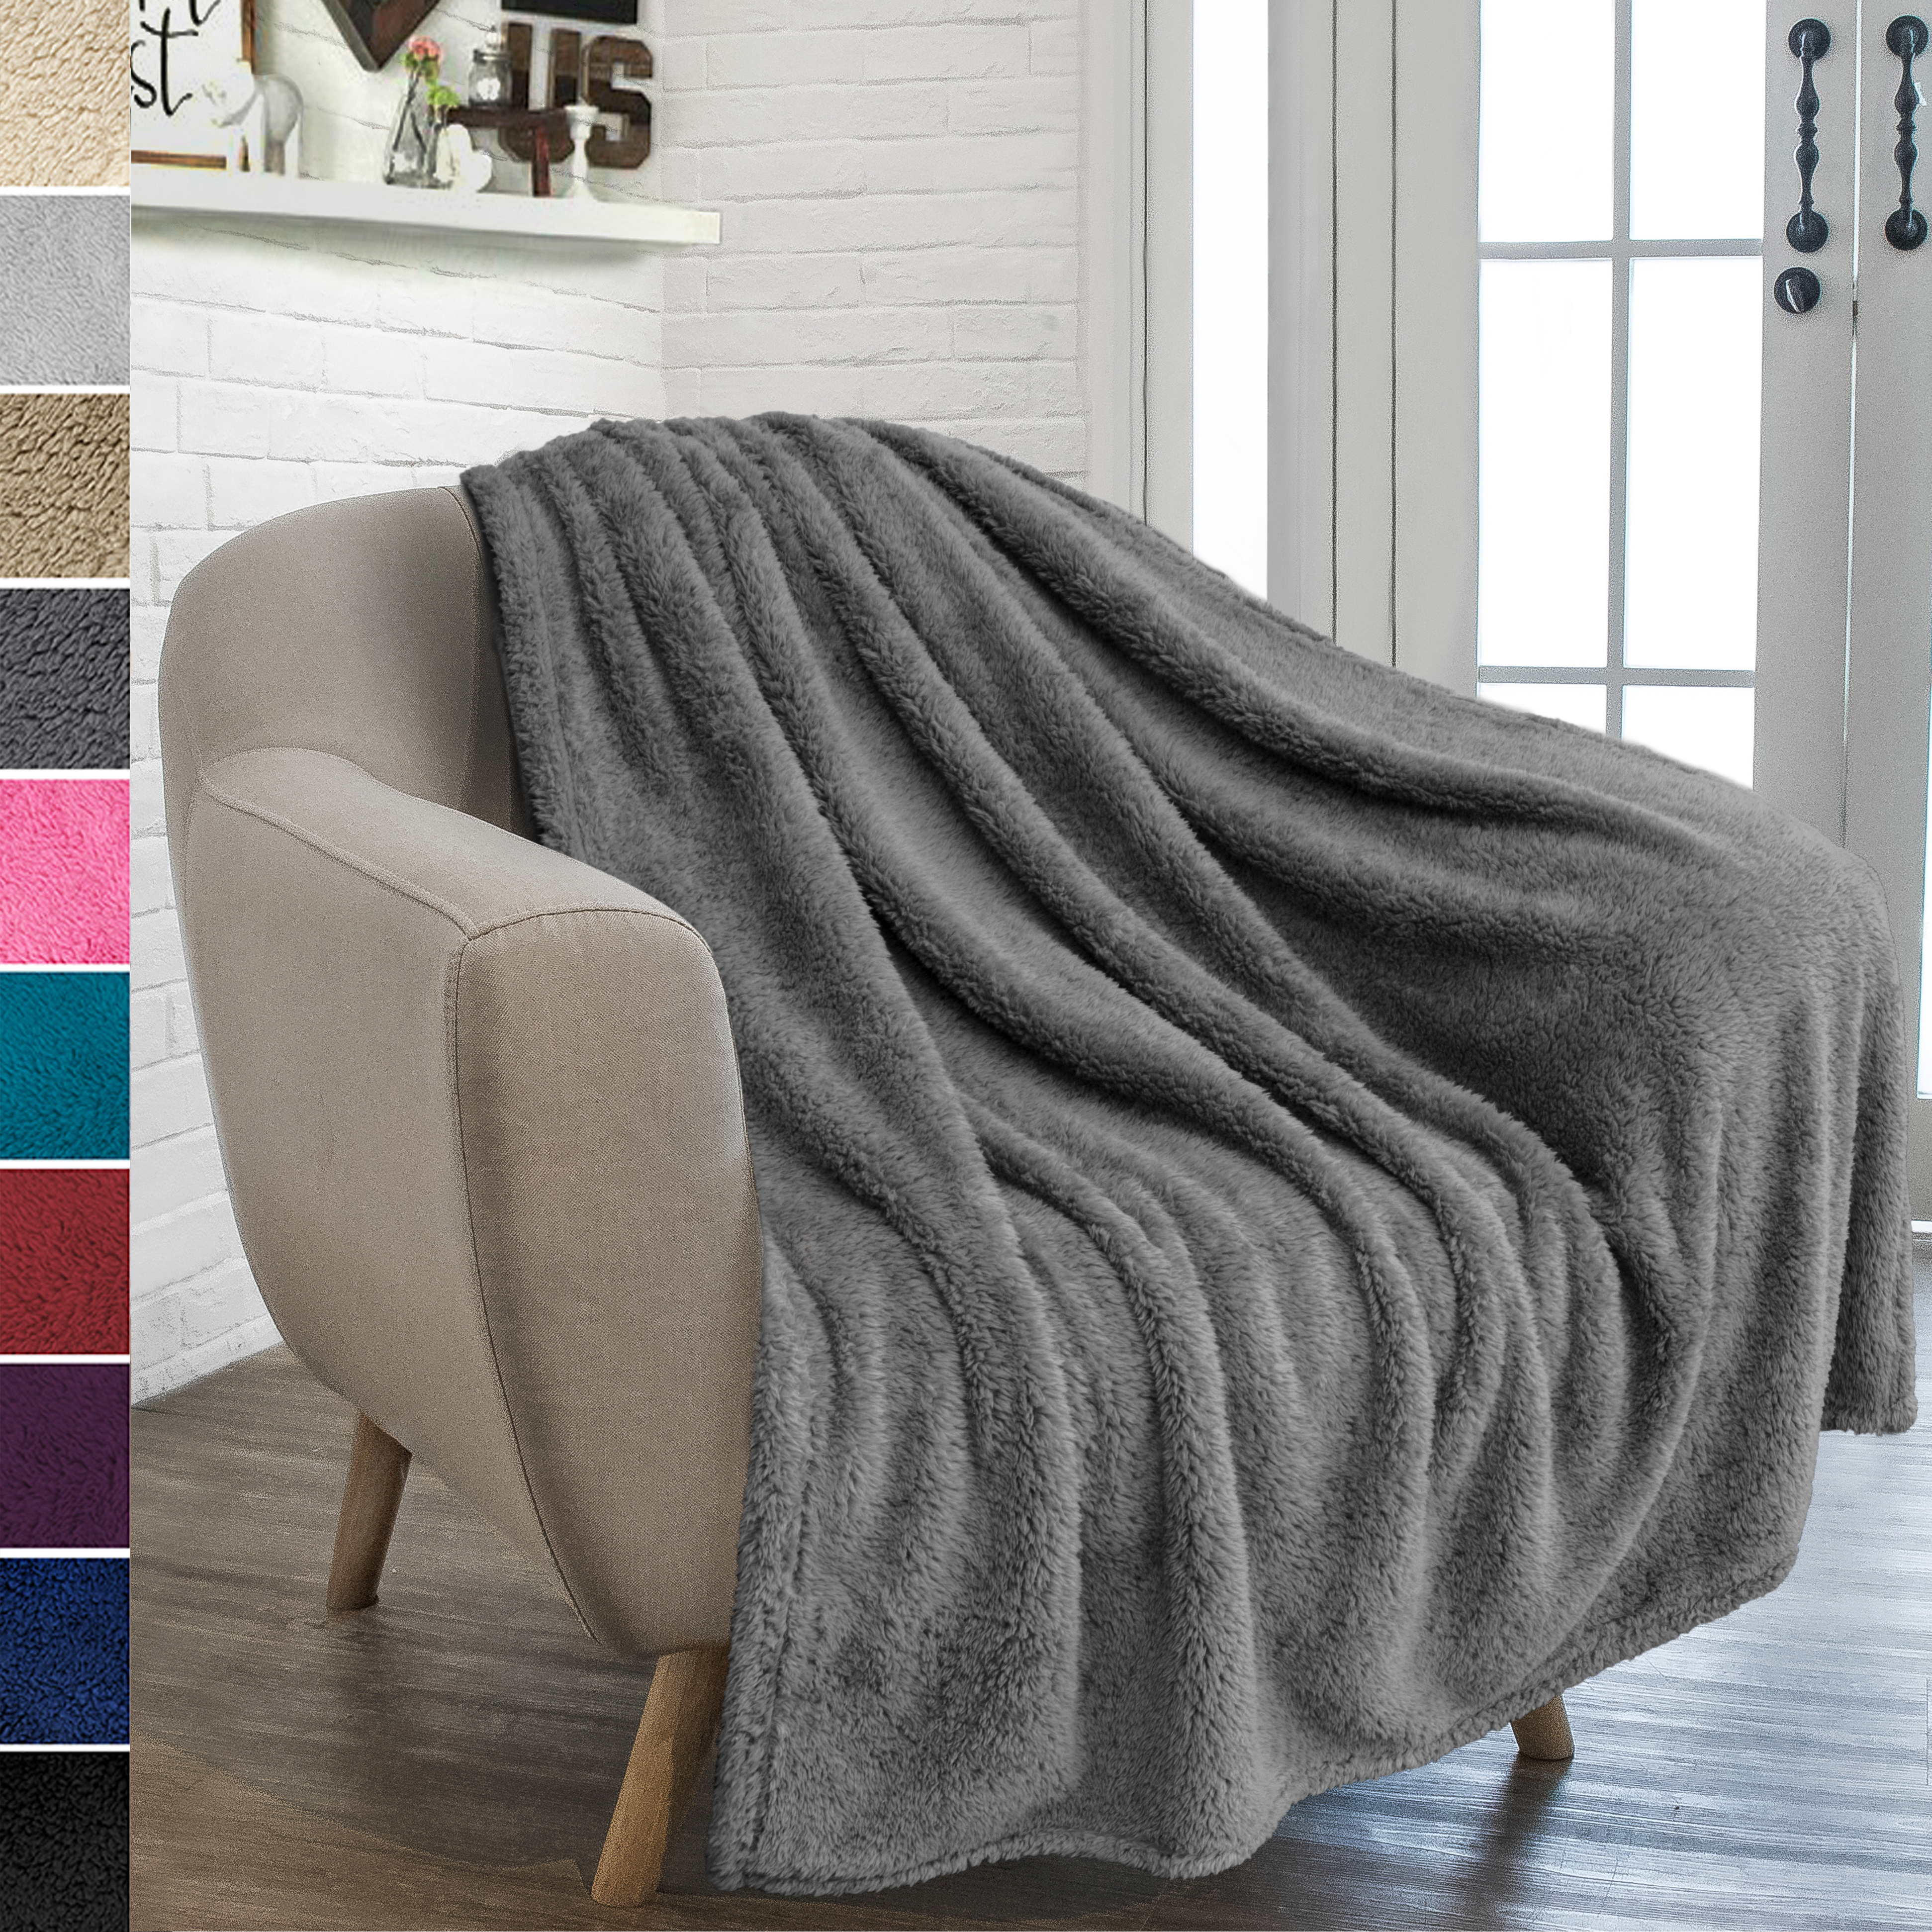 60x80 Inch Super Soft Thick Fuzzy Bed Blankets for Couch Bed Sofa Chair SIGOUYI Sherpa Fleece Throw Blanket for All Seasons Christmas Carnival Party Plush Fluffy Reversible Sherpa Fleece Cover 